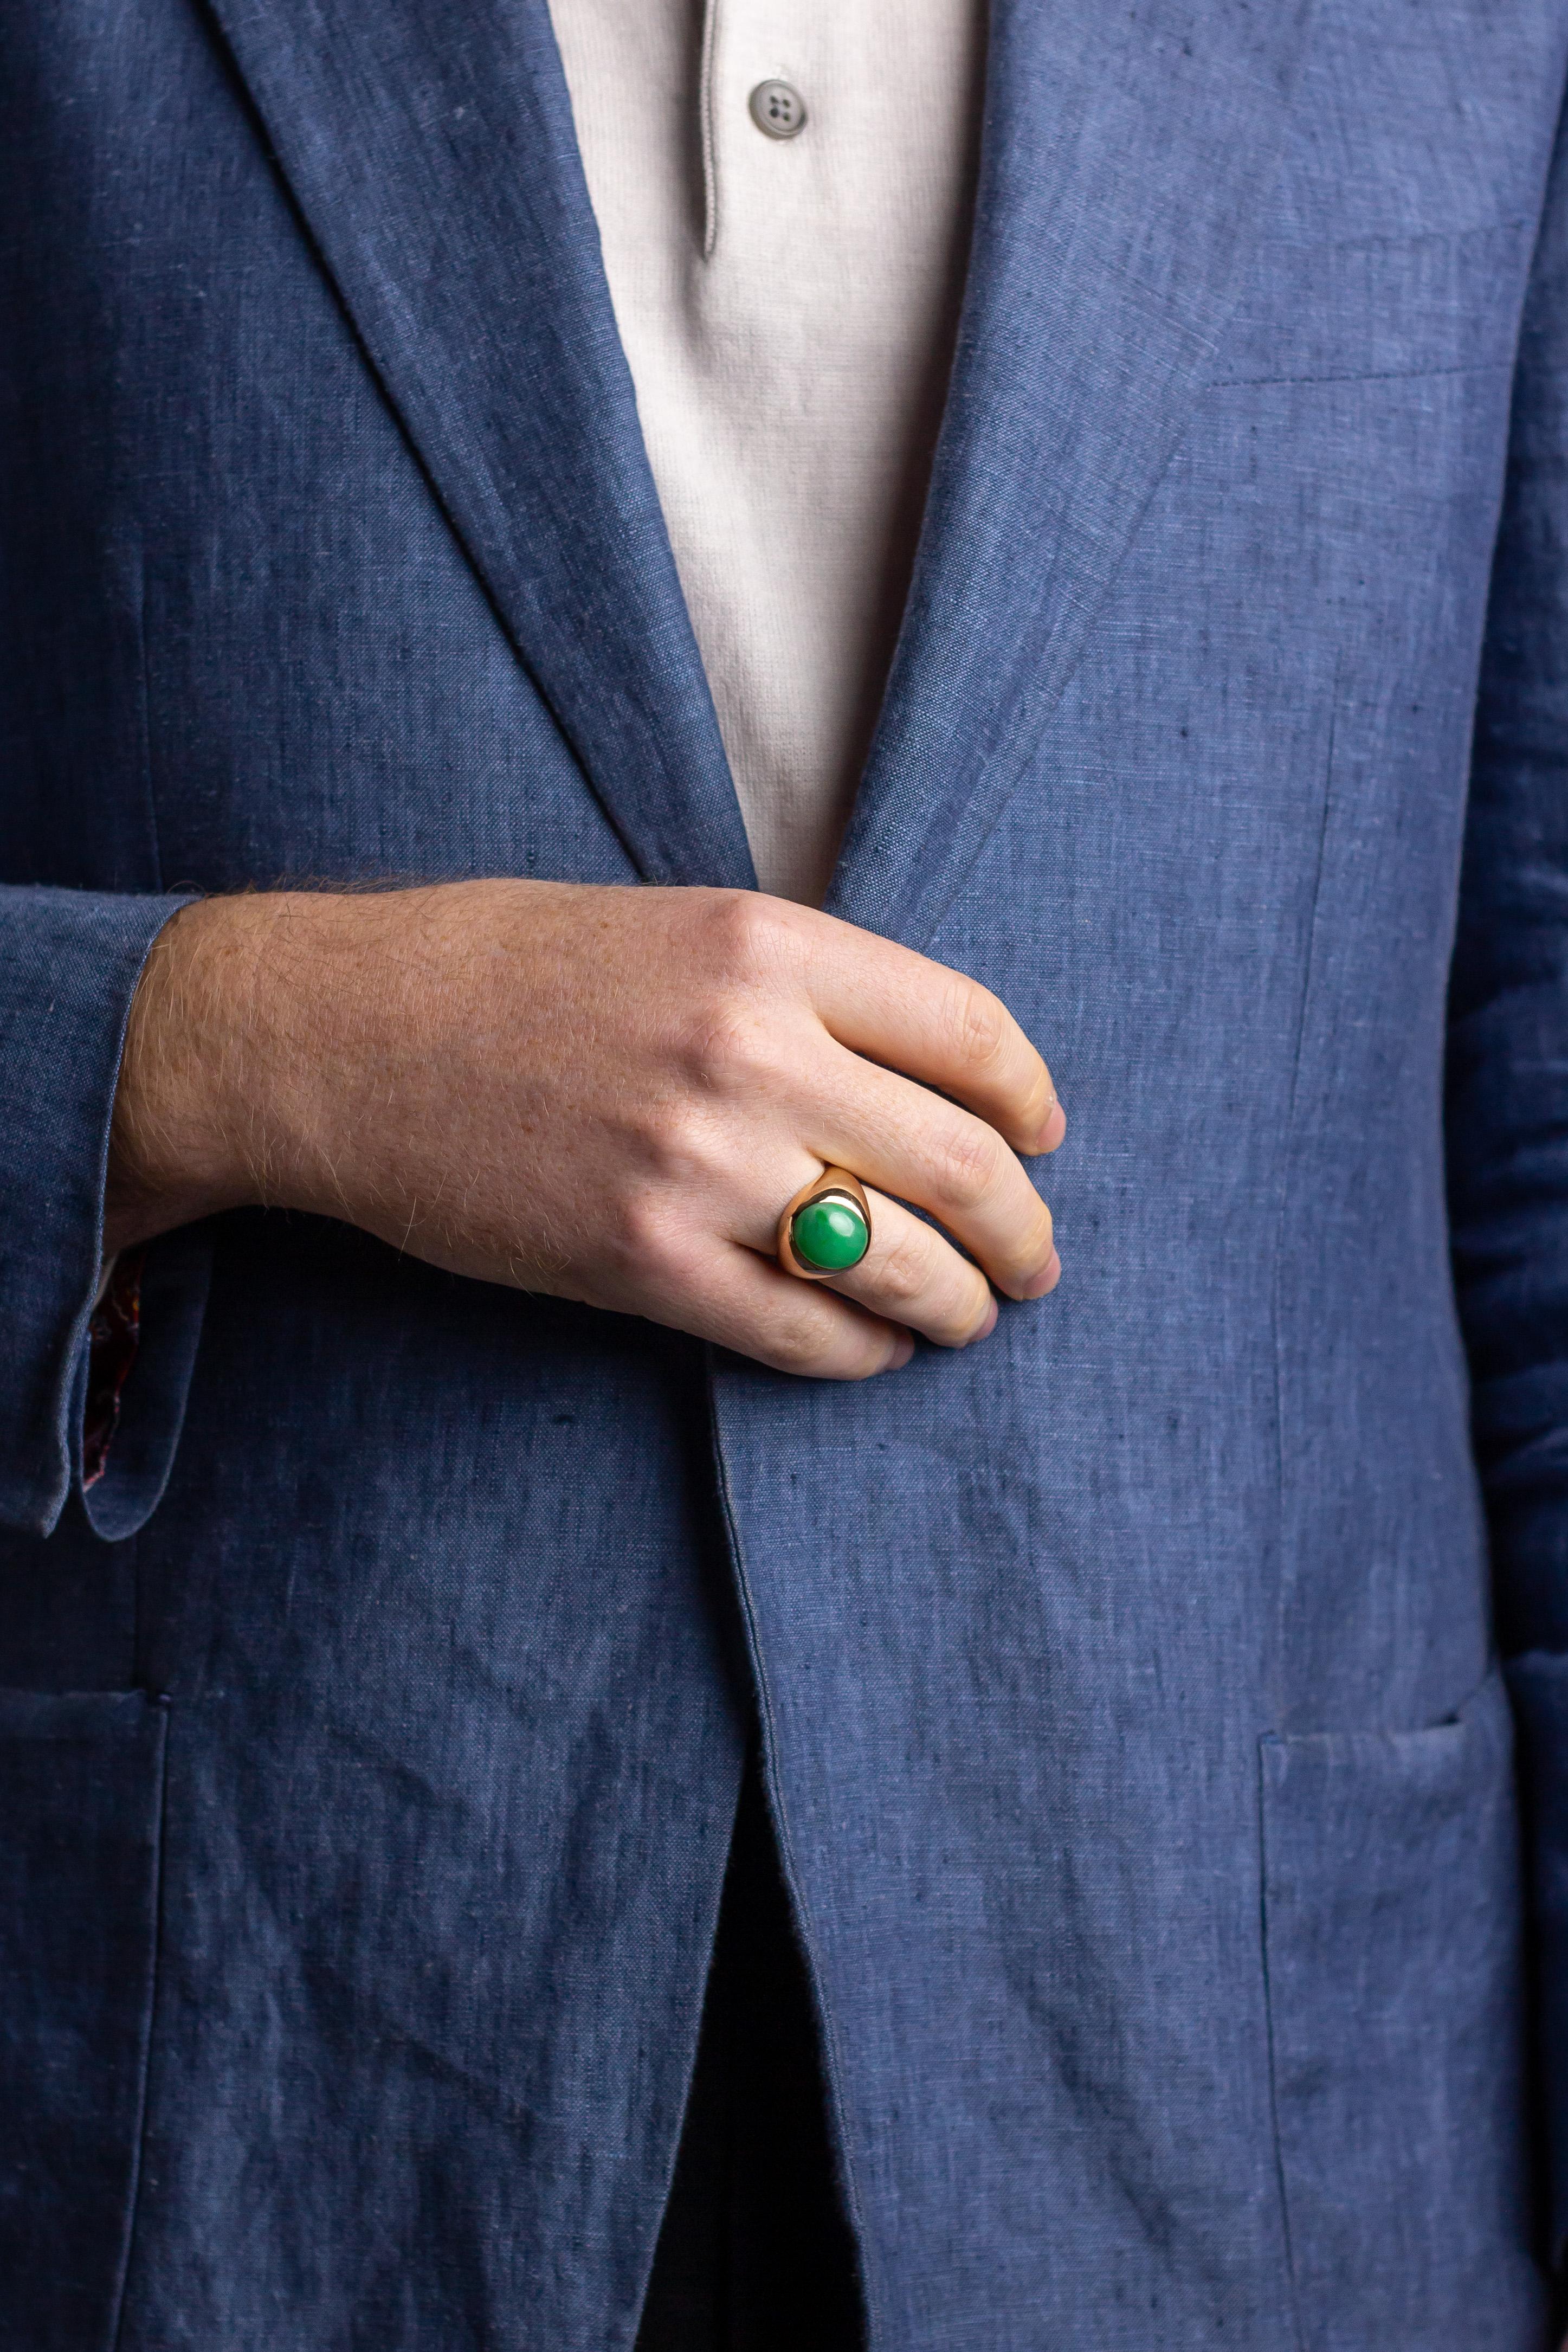 This sleek and simple jadeite jade ring is crafted from 14 karat yellow gold. The centre of the ring features a rub-over set piece of oval cabochon cut mottled green jadeite jade. The simple gold ring features a tapered shank with thickened gold